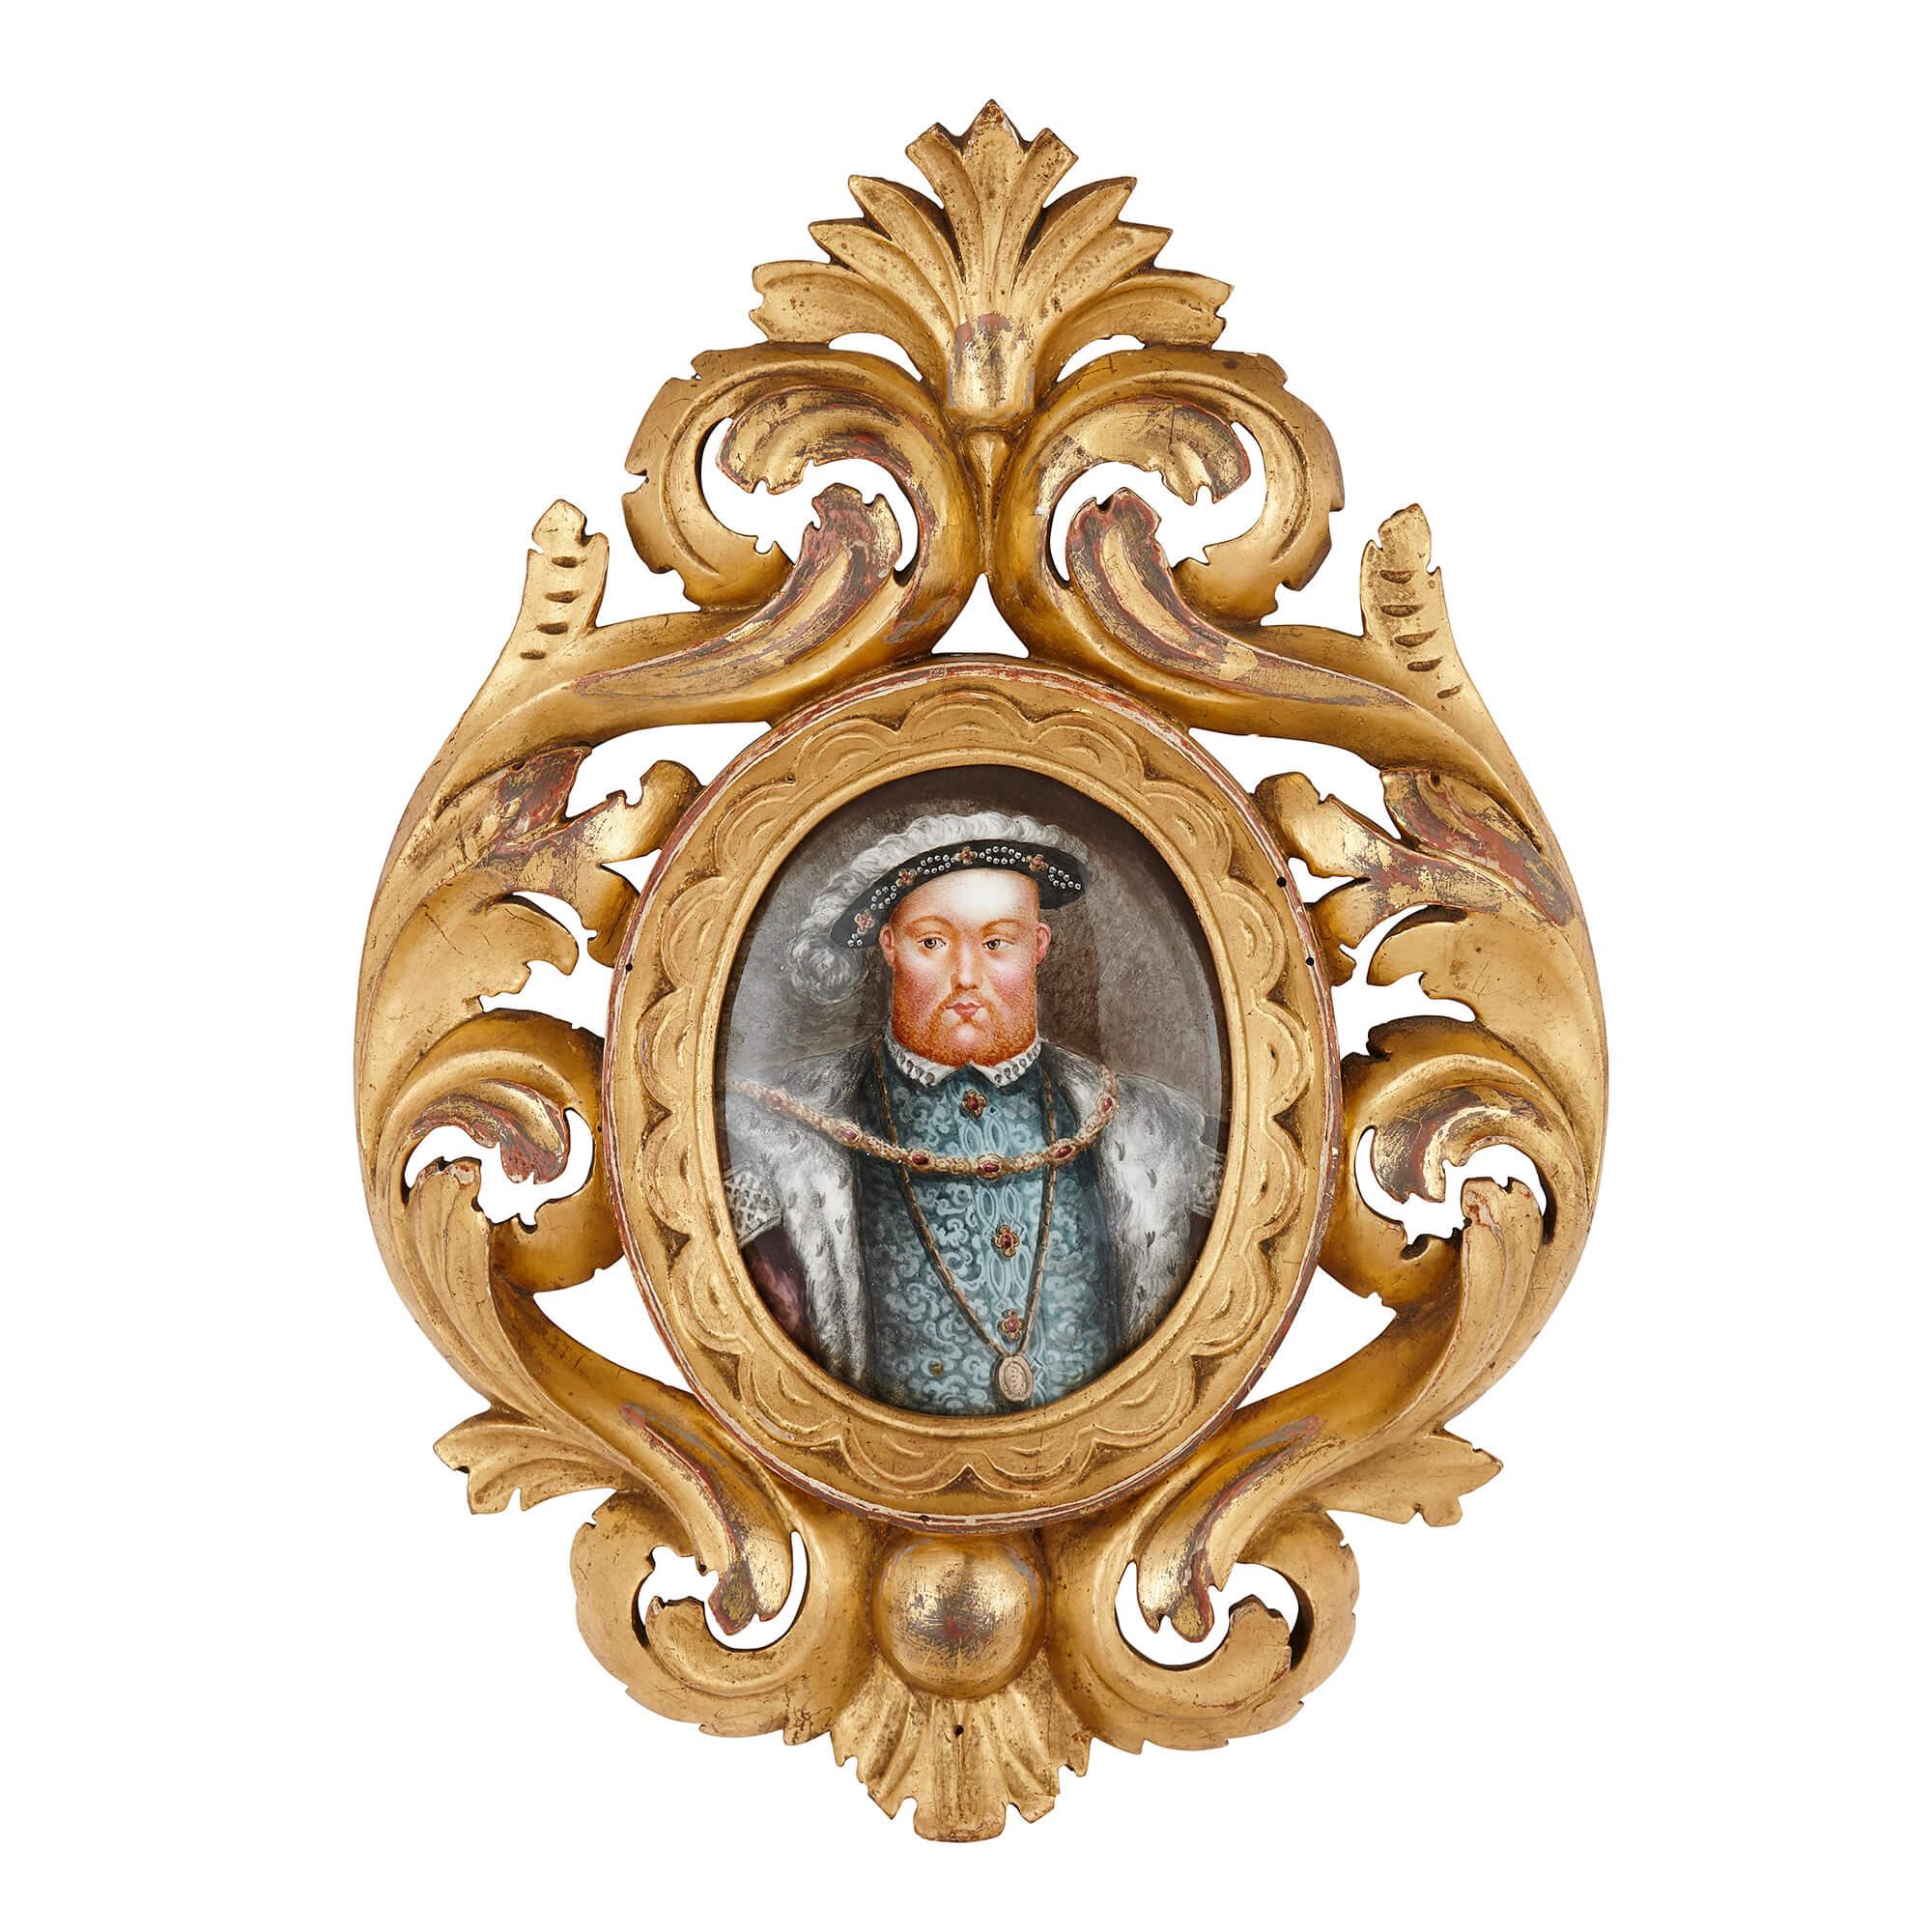 These exquisite portrait plaques were made in the French town of Limoges, which is renowned for the fine quality of its enamel wares. The panels have been painted with oval, half-length portraits of British Tudor monarchs, set within elaborate